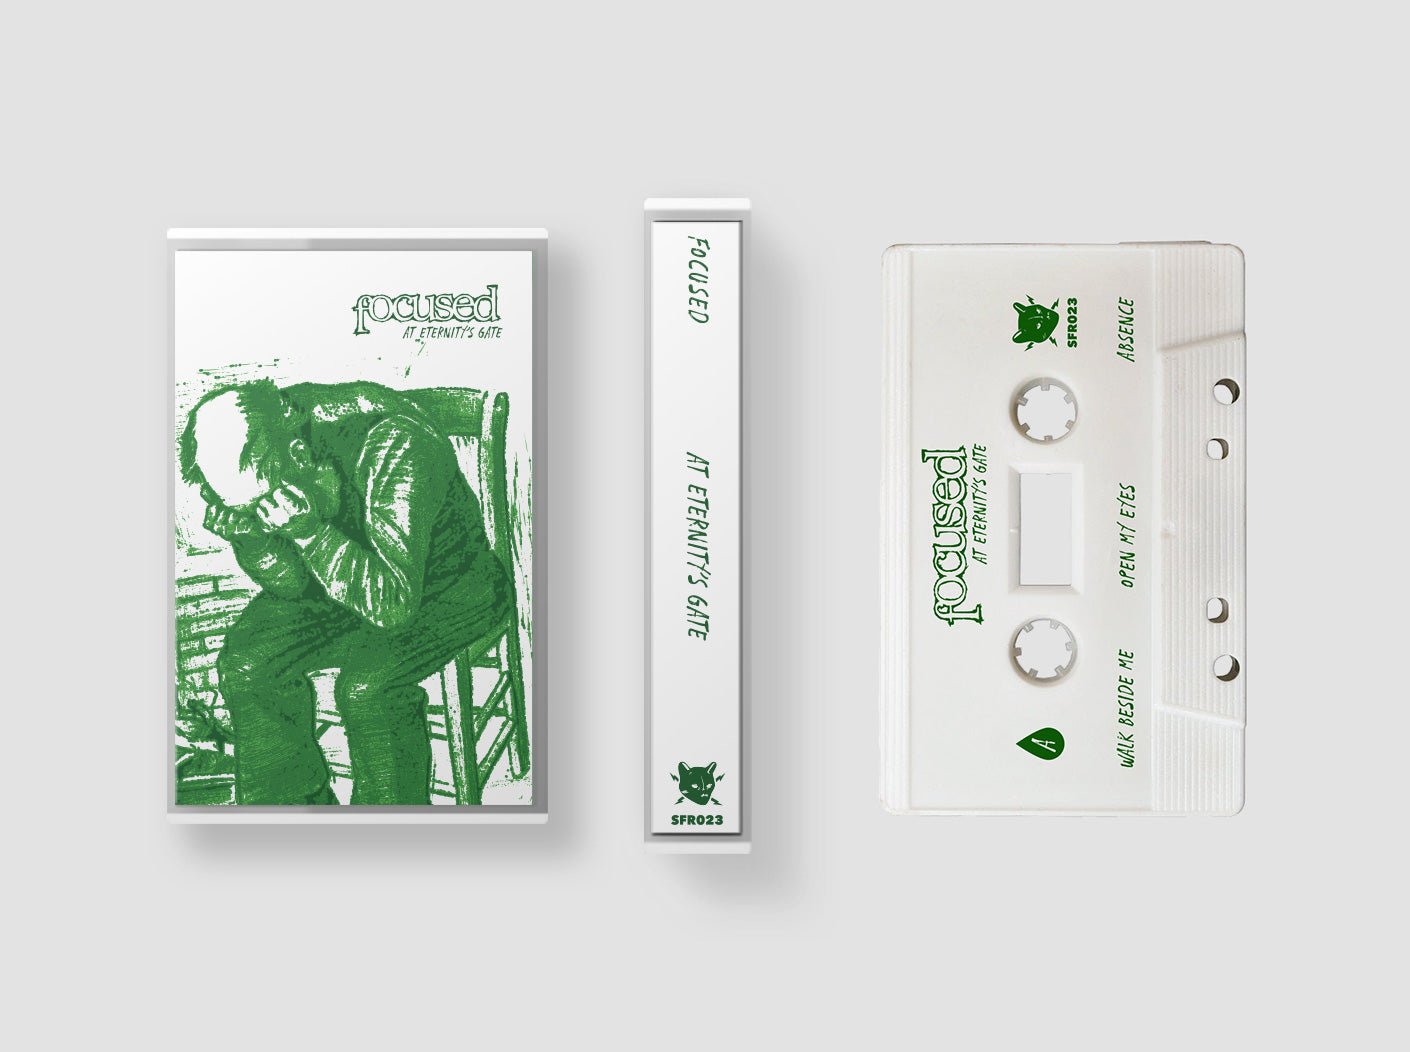 Focused: At Eternity's Gate: Cassette - Steadfast Records